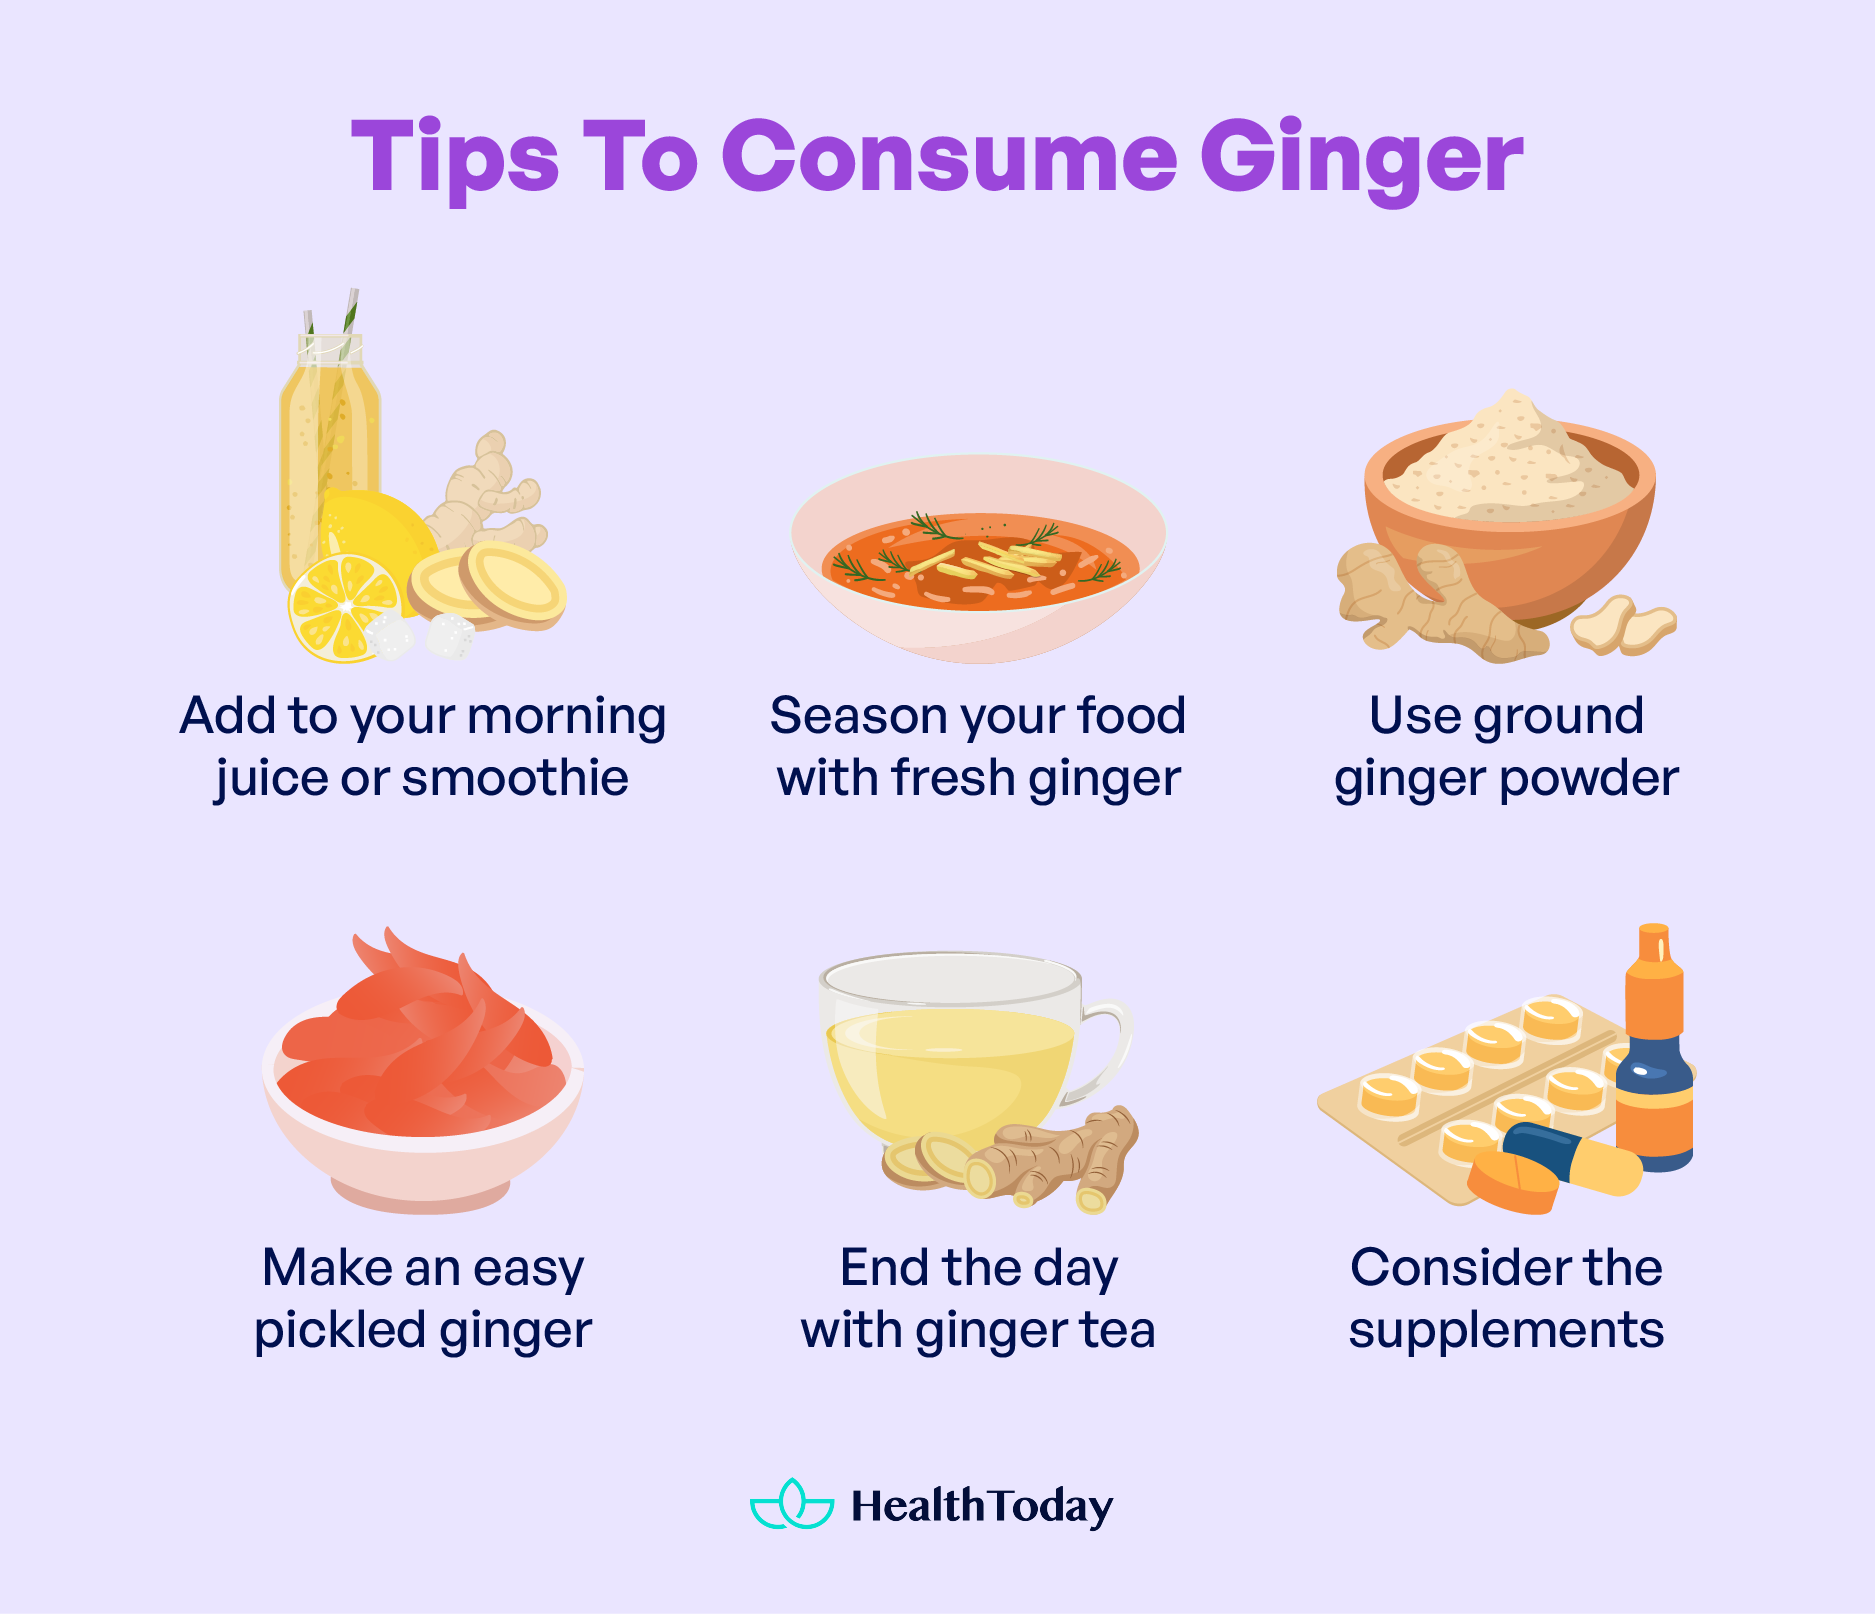 Tips to consume ginger